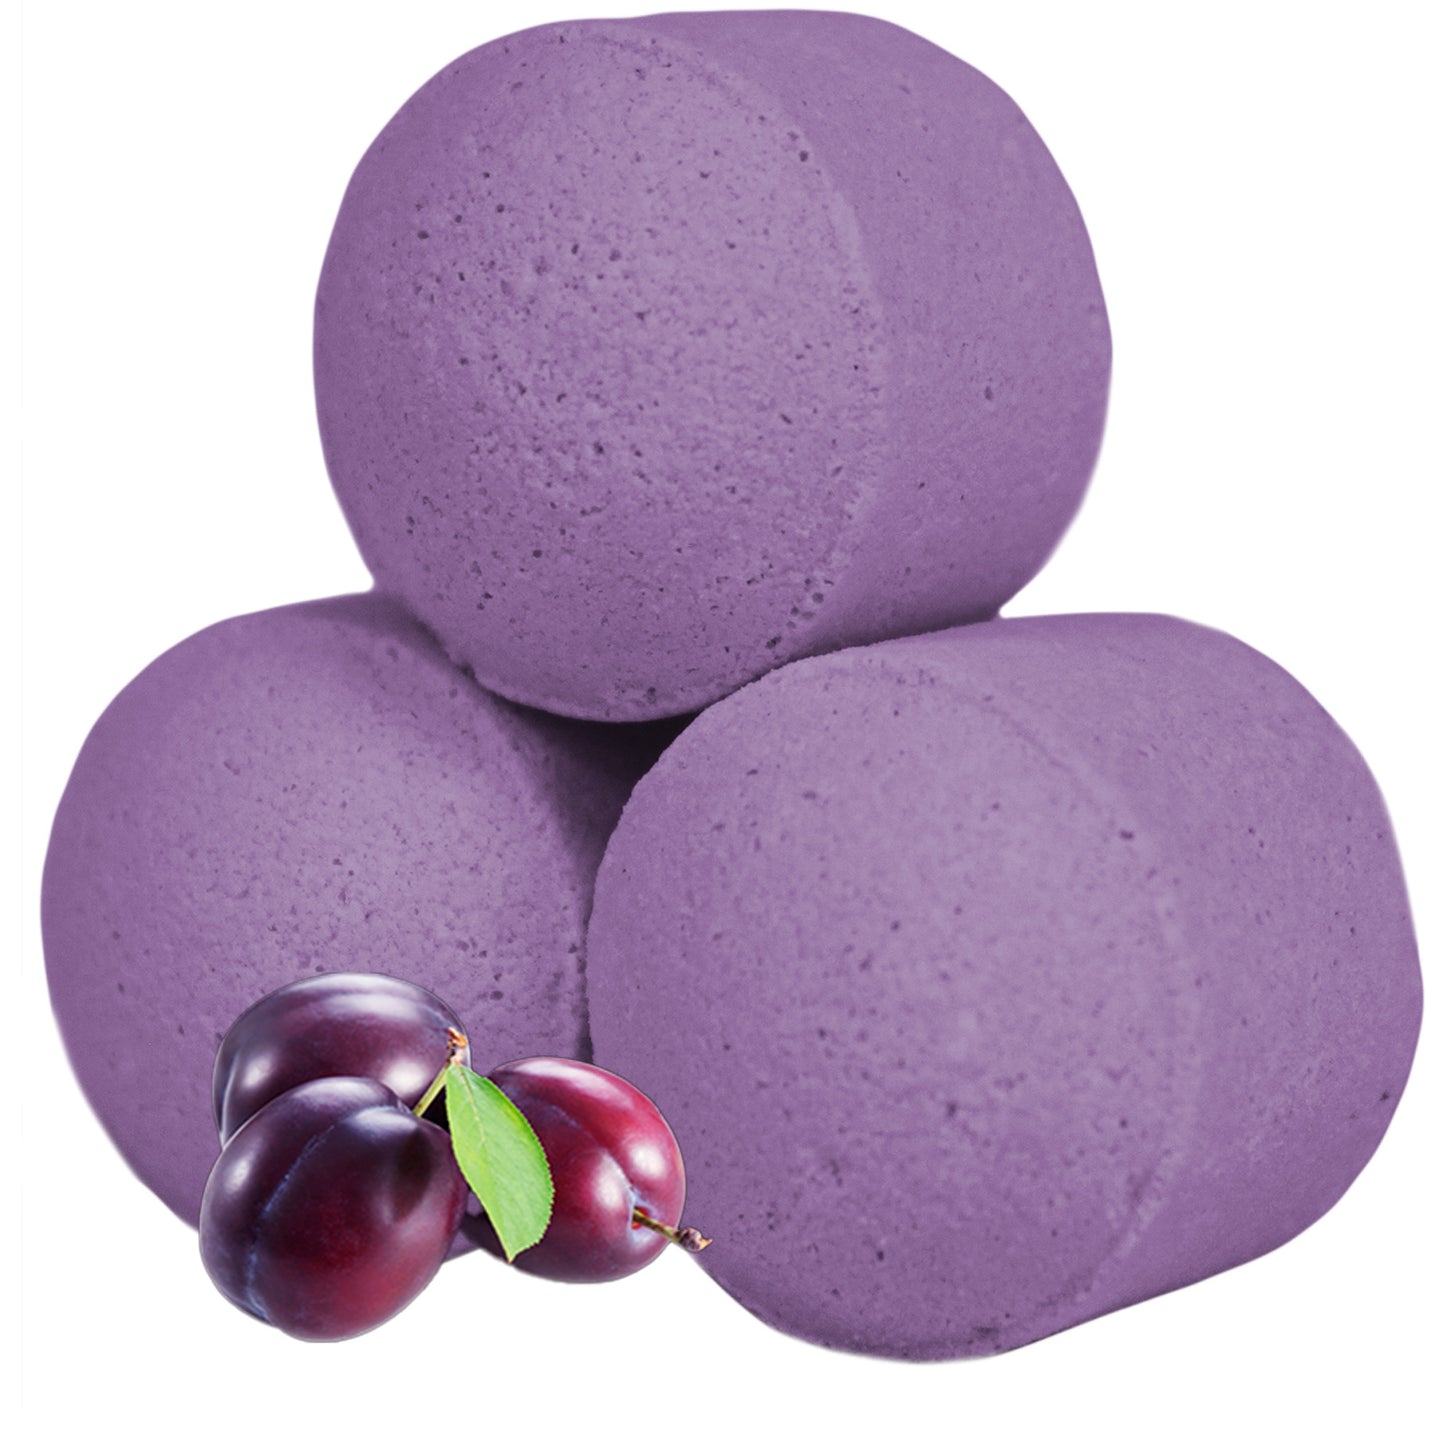 1.3Kg Box of Chill Pills - Frosted Sugar Plum